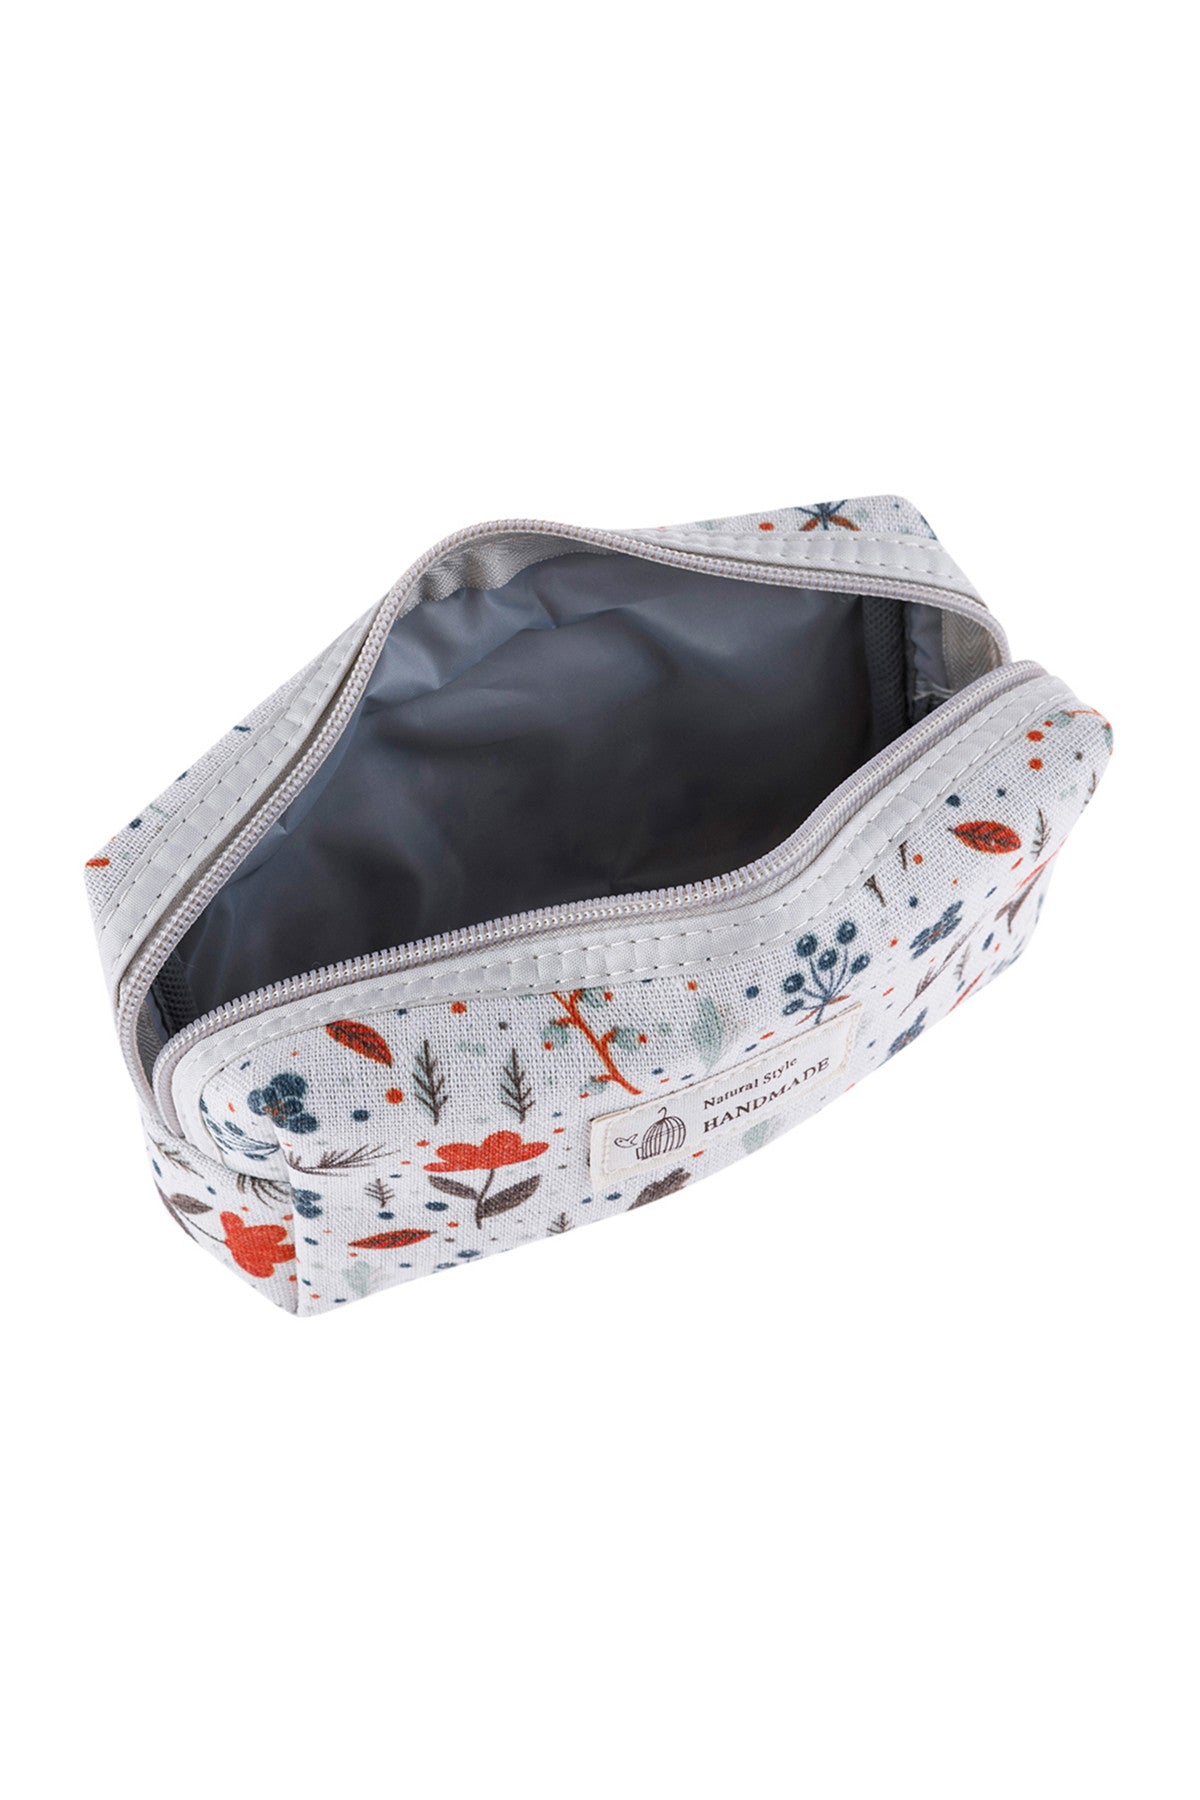 8 STYLE 8 TINY PLANT PRINT COSMETIC BAG /6PCS (NOW $1.50 ONLY!)